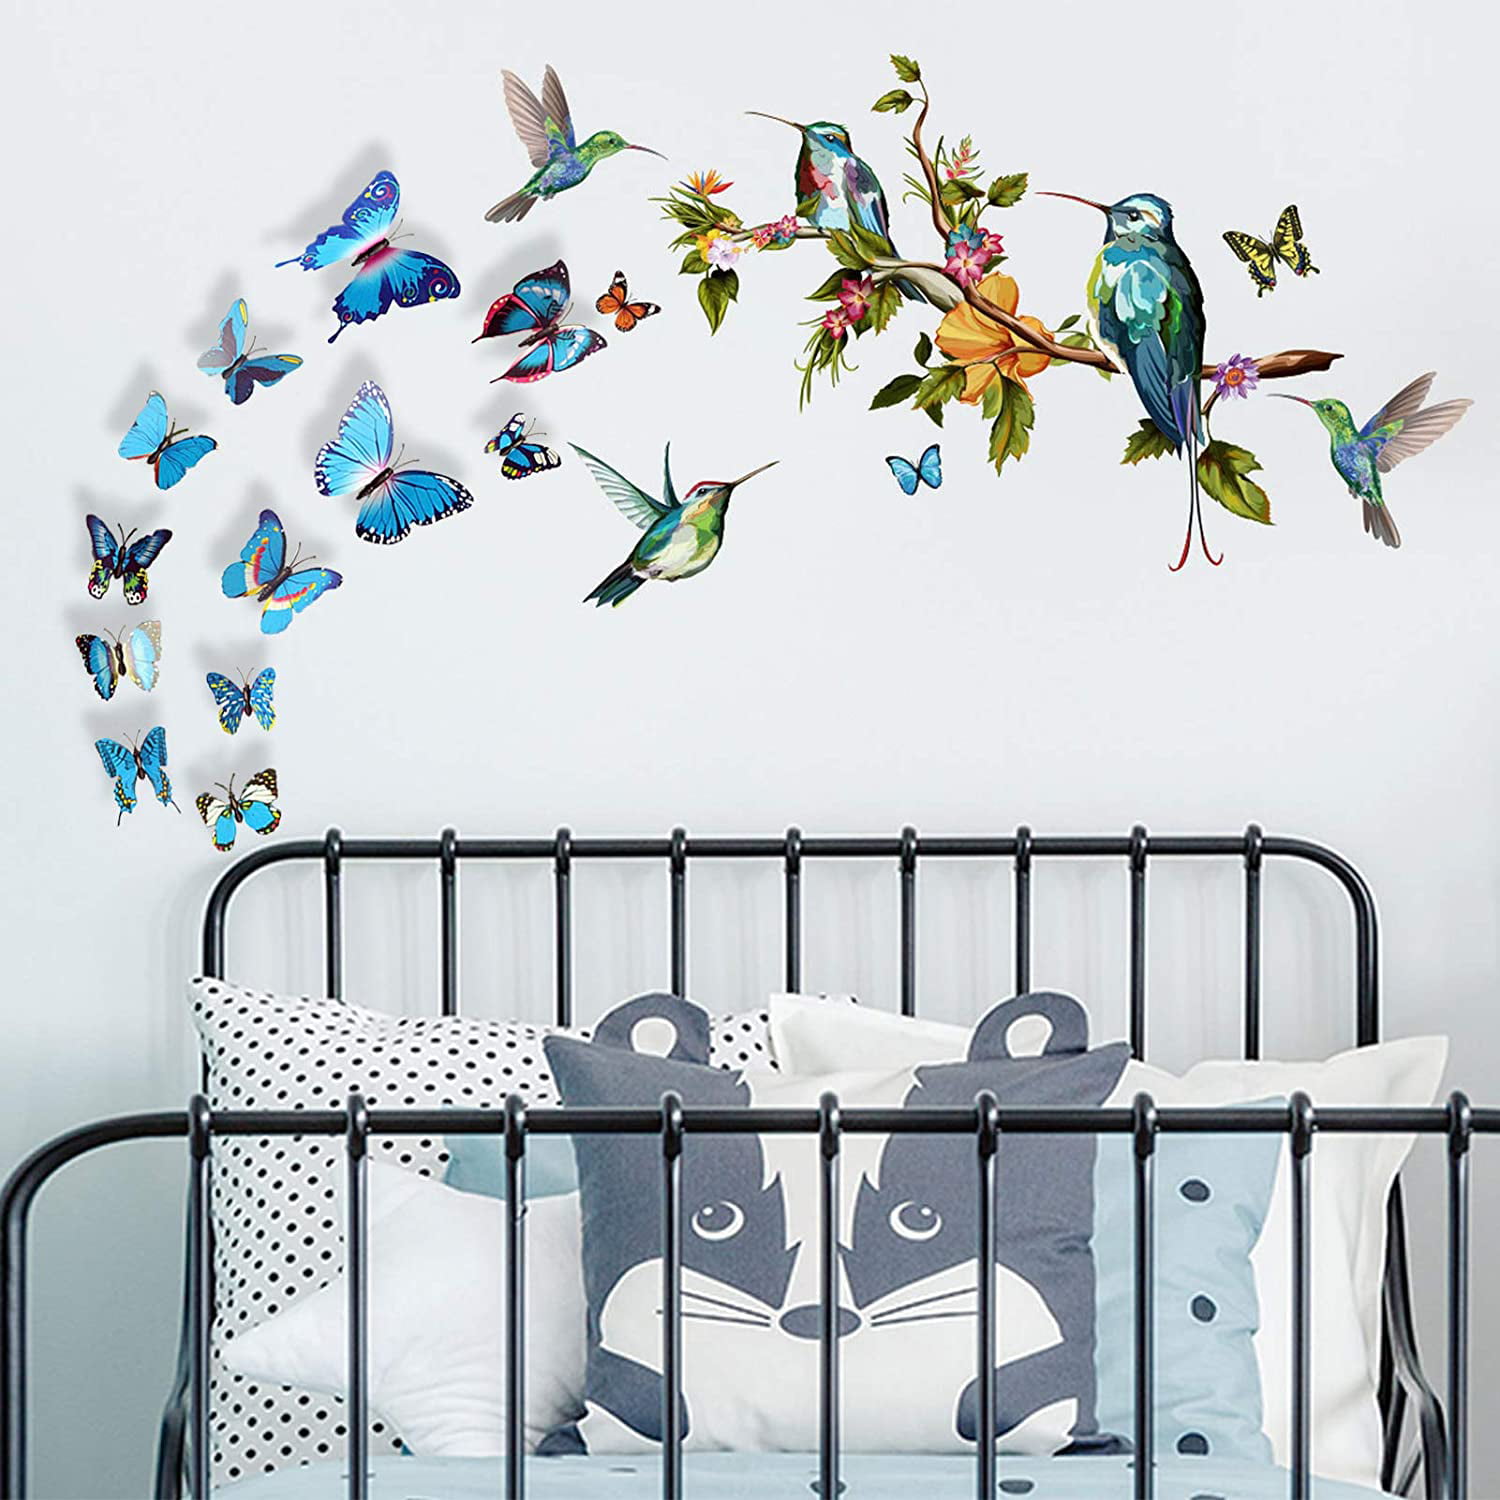 Hummingbird Wall Decals with 12 PCS 3D Colorful Butterfly Wall Stickers for Home Bedroom Removable Watercolor Birds on Tree Branch Wall Art Mural Decor Home Decorations for Living Room Bedroom